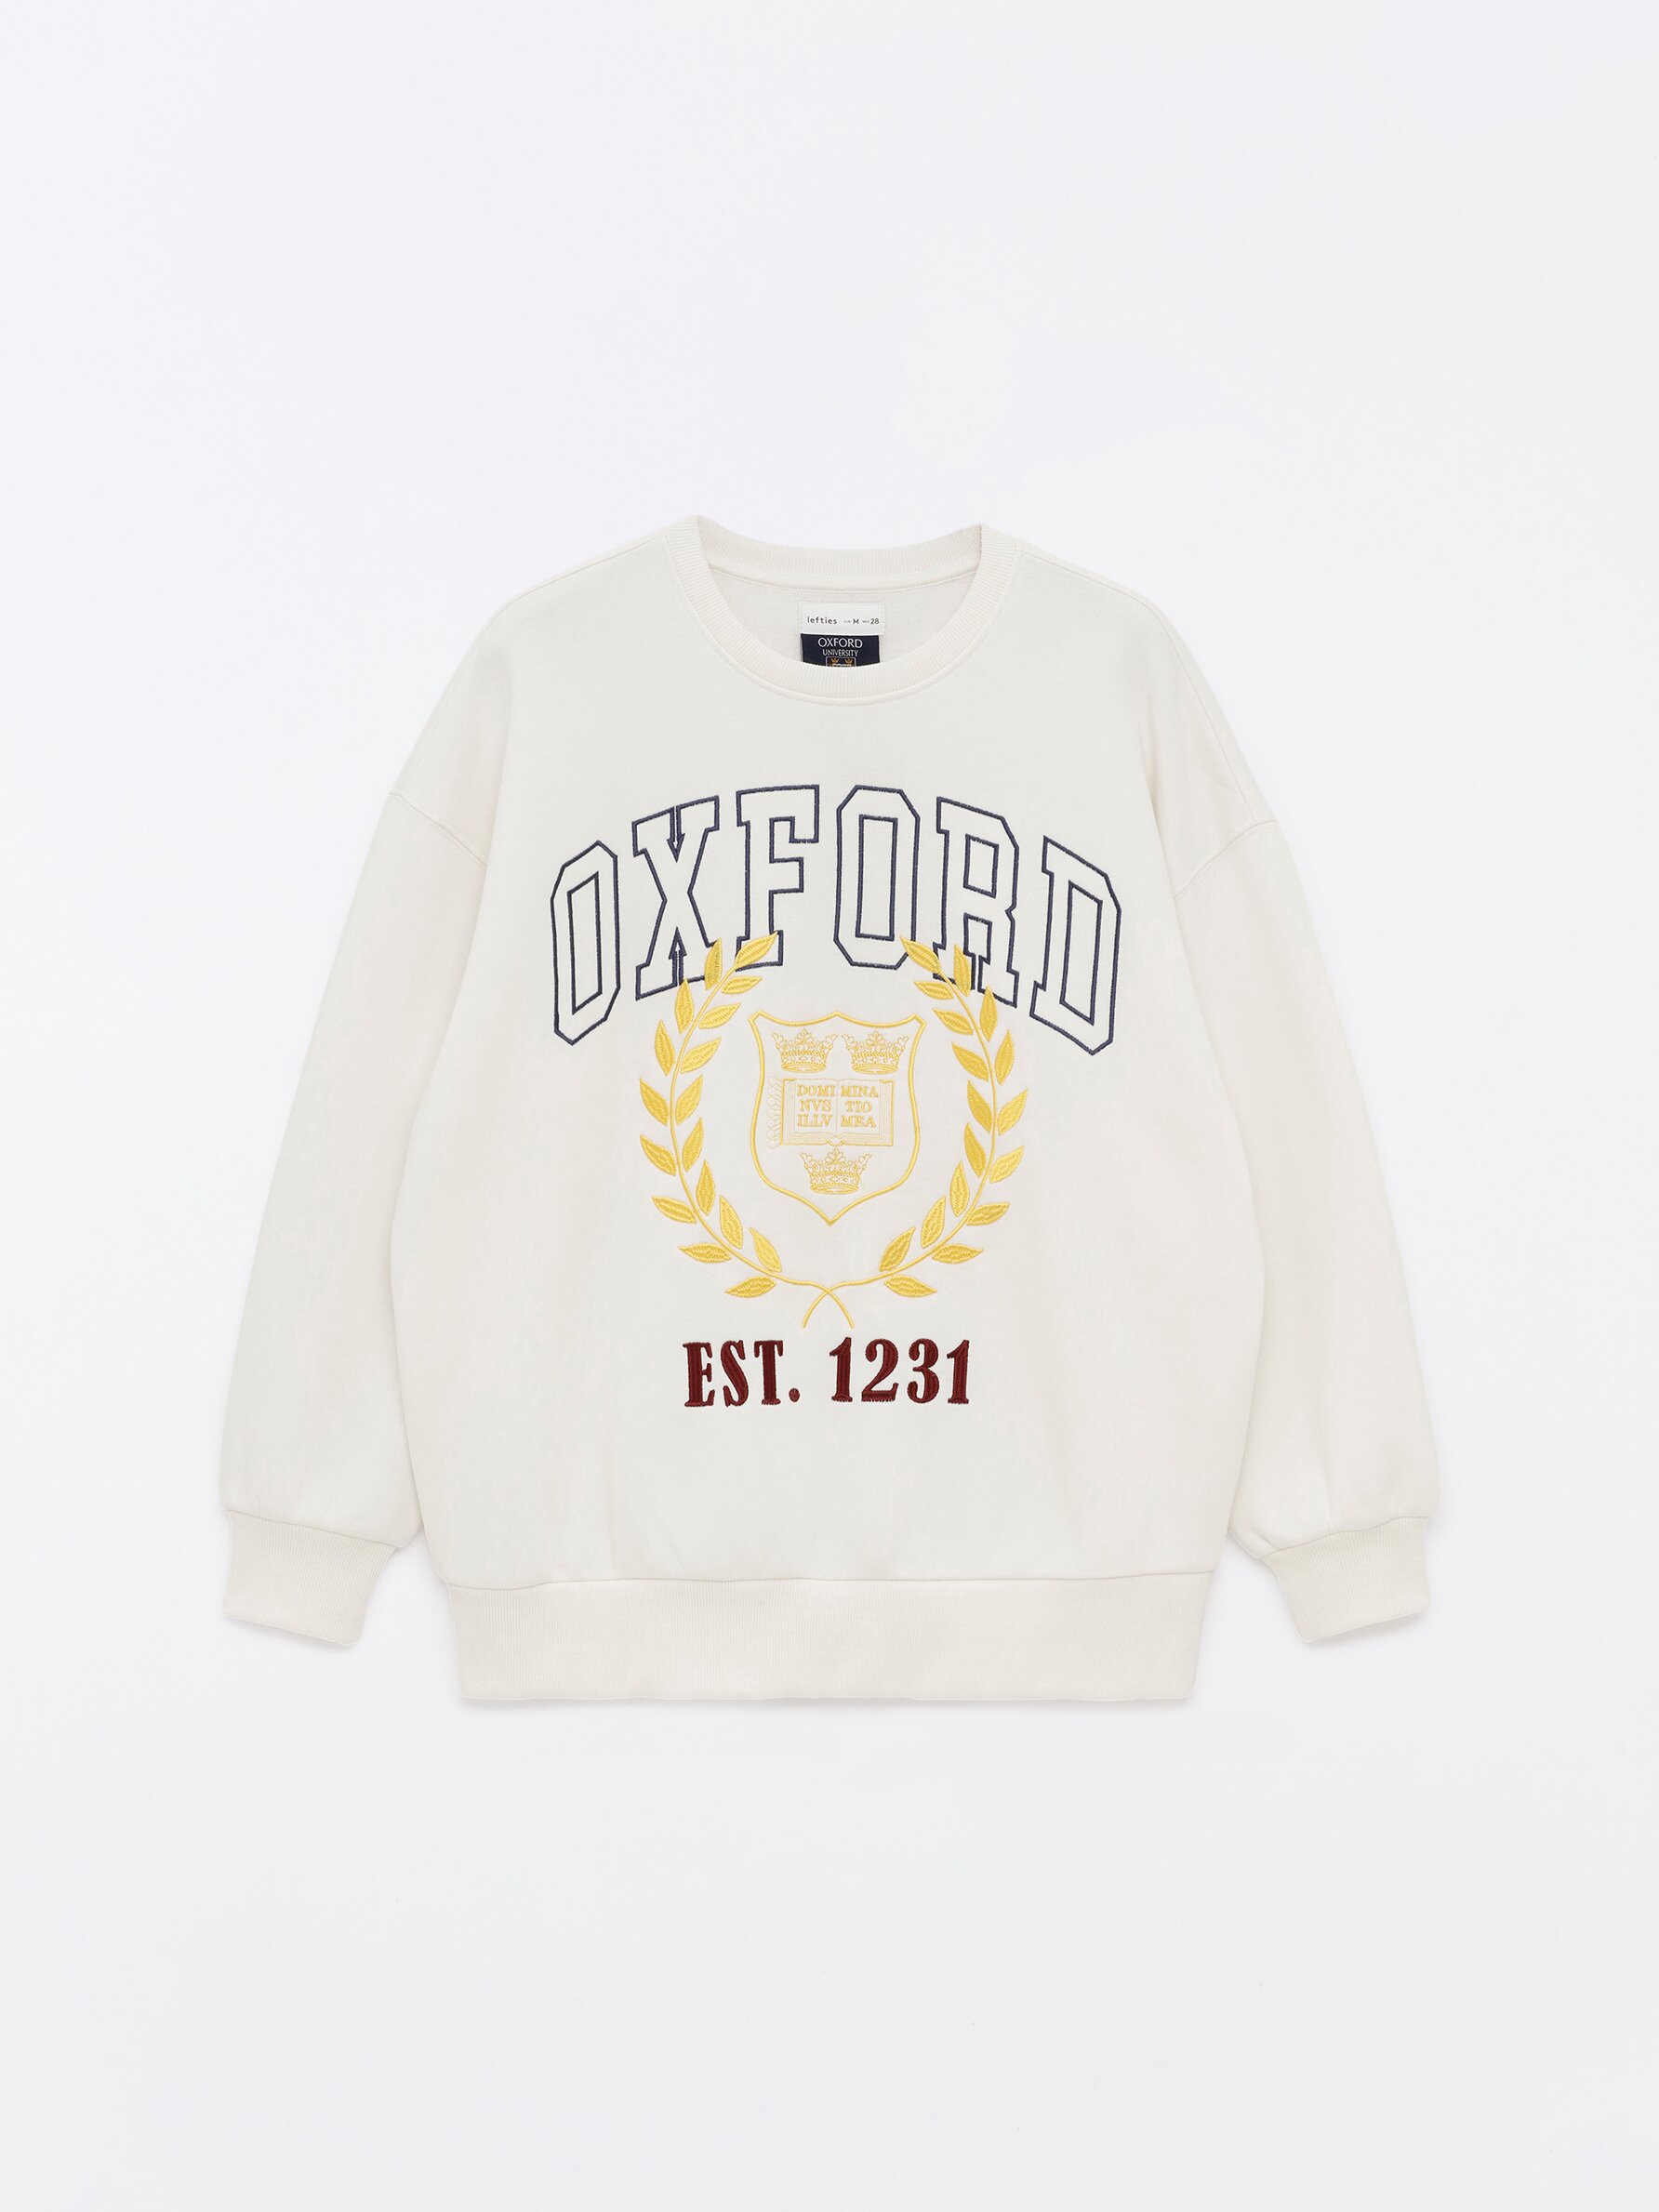 Sweatshirt with Oxford University embroidery - NEW IN - Woman